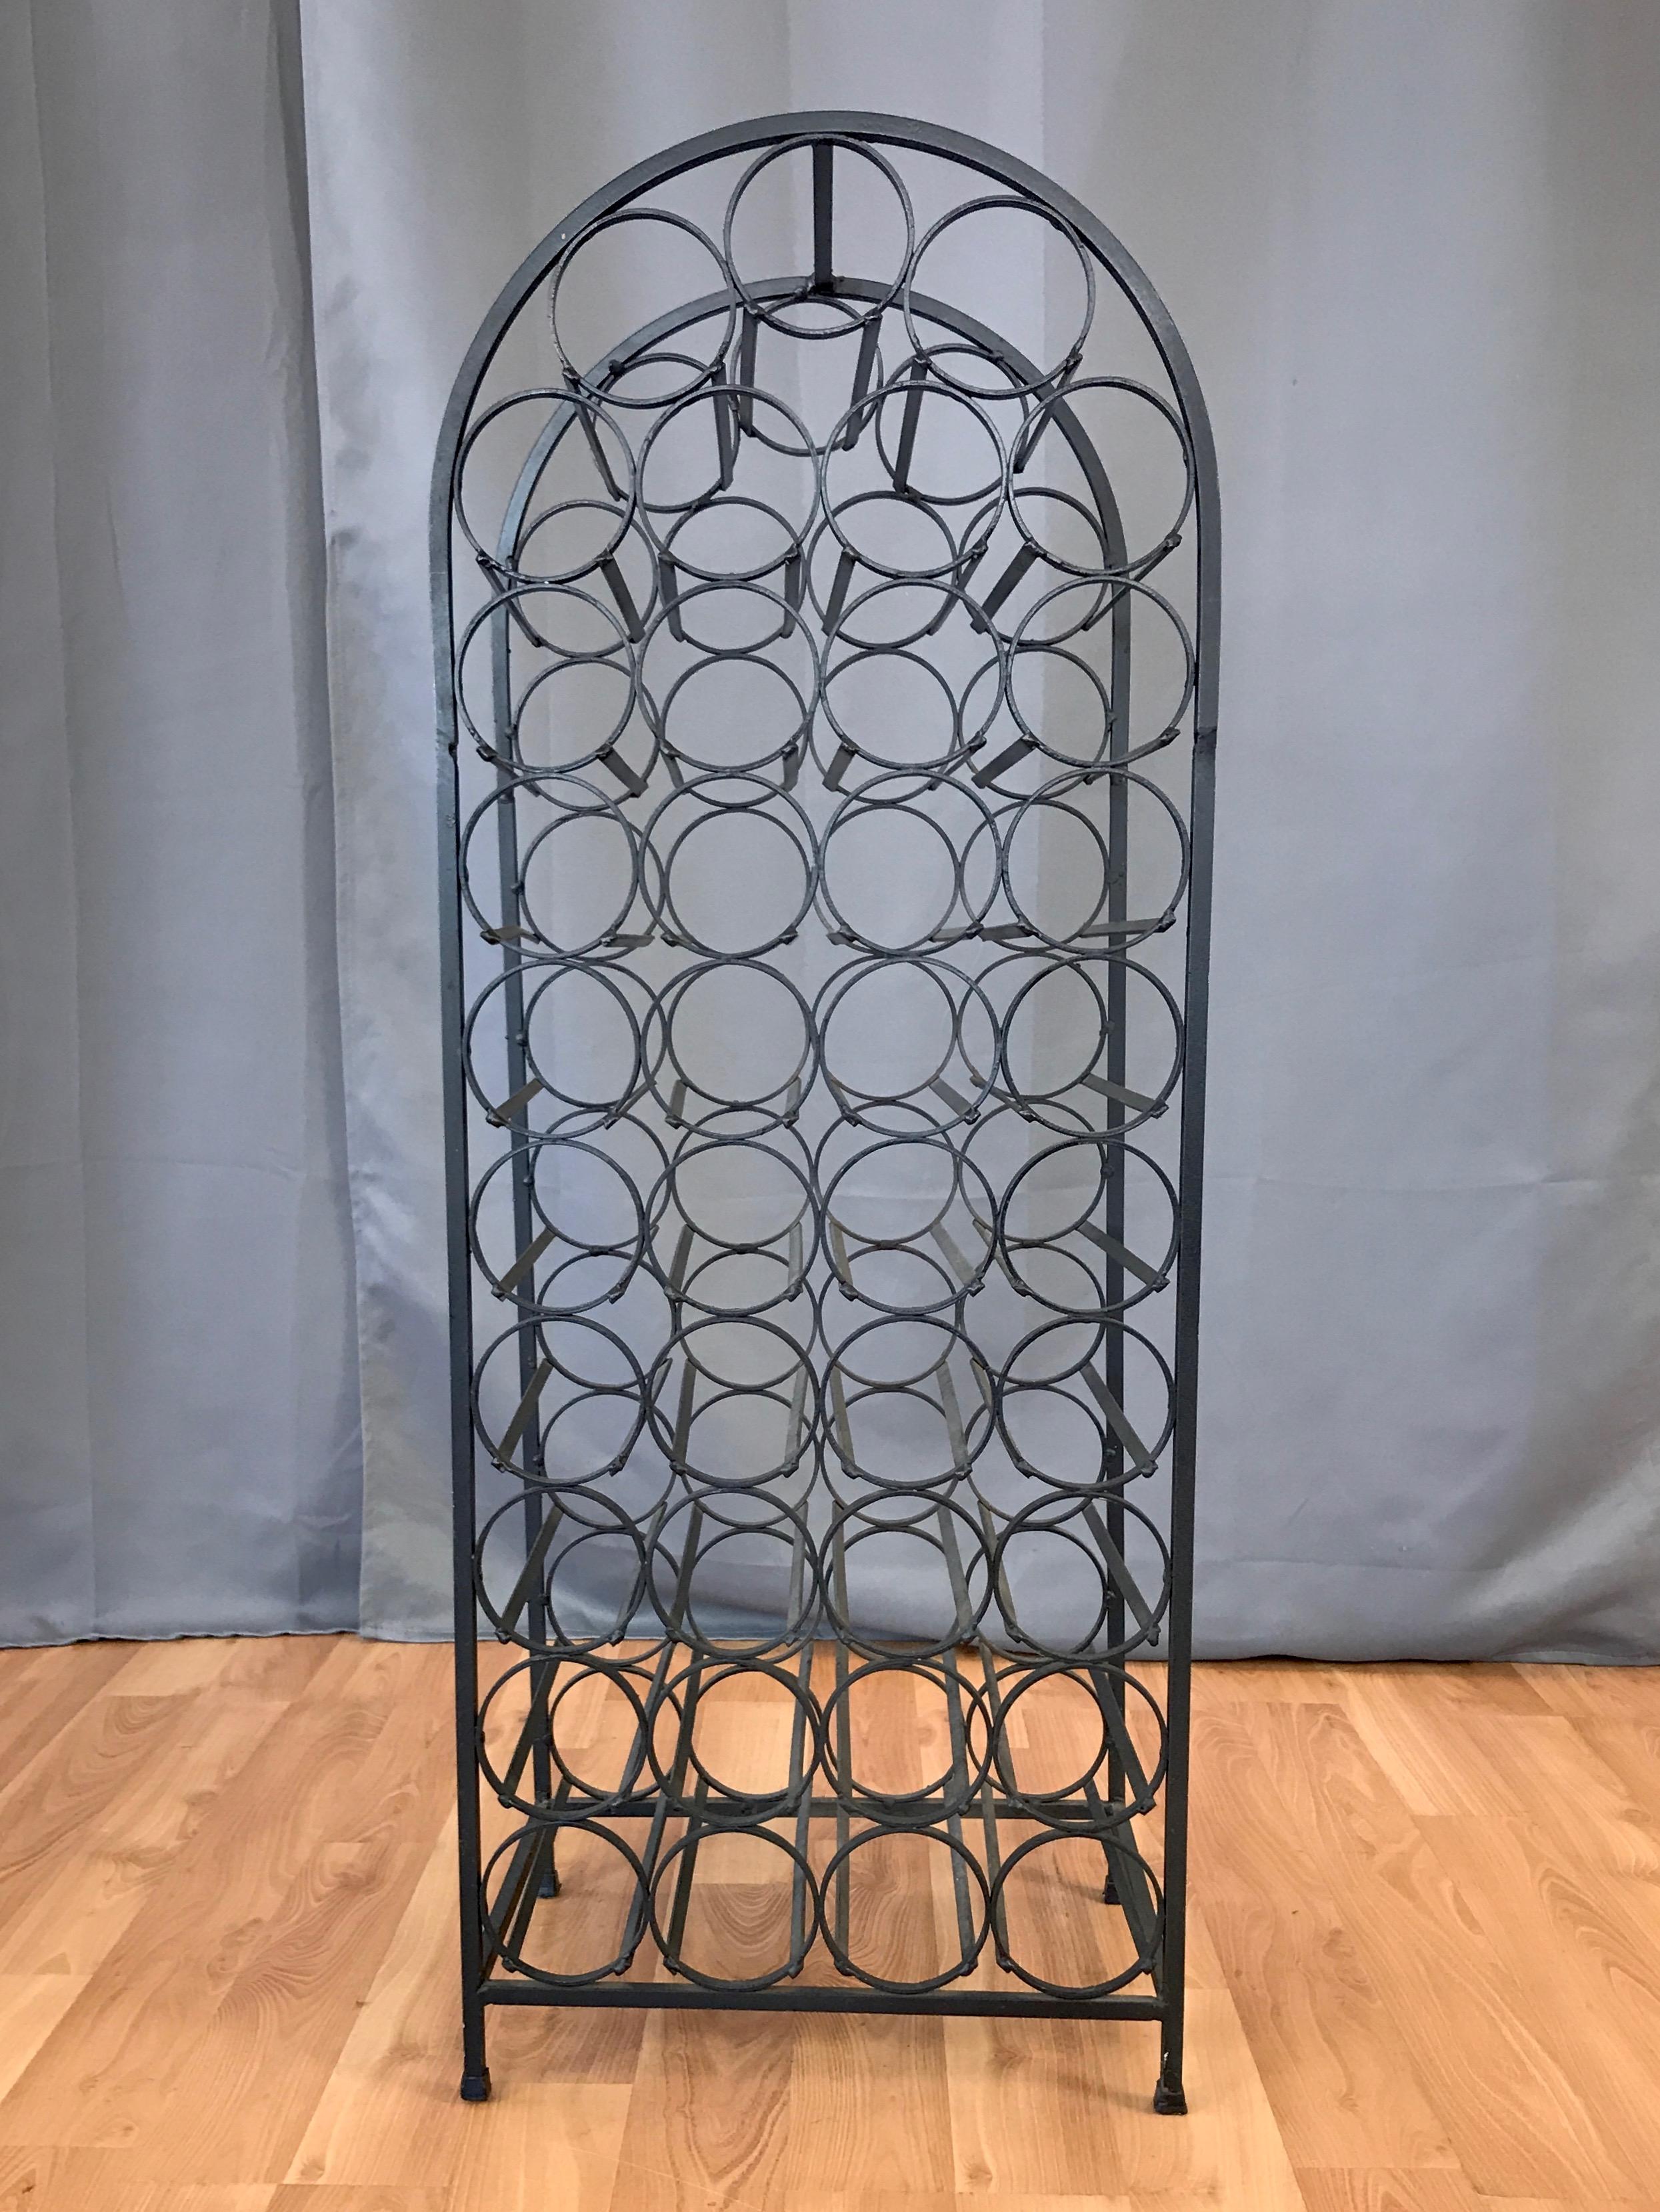 A late 1960s 39-bottle wrought iron wine rack by Arthur Umanoff, originally offered by Boyeur Scott Furniture Co., and later by Shaver Howard.

Heavy arched frame nicely echoes the body of a wine bottle, and neatly contains 39 slots with hooped